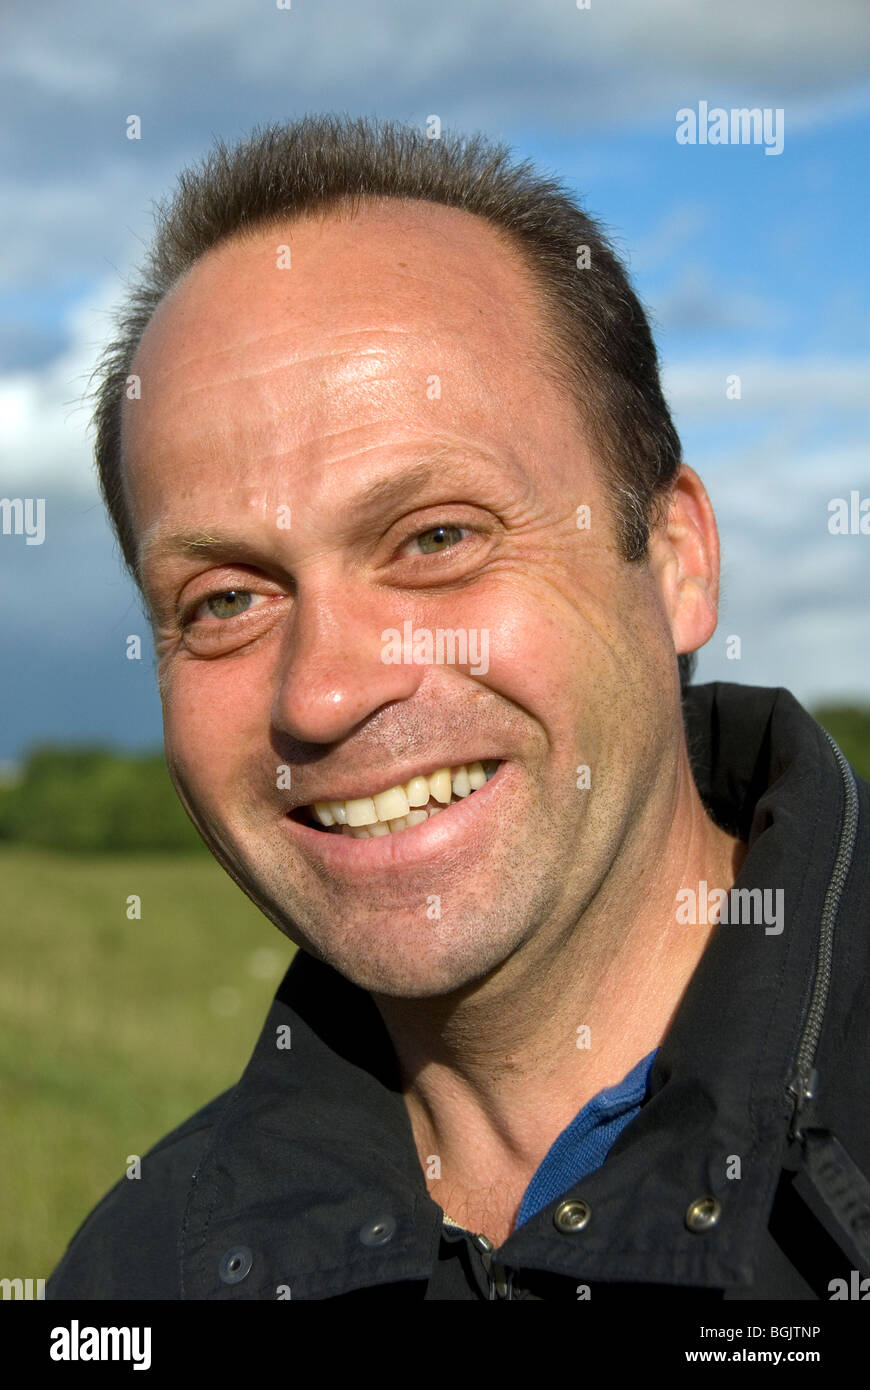 Portrait of a laughing man, England, Great Britain, Europe Stock Photo